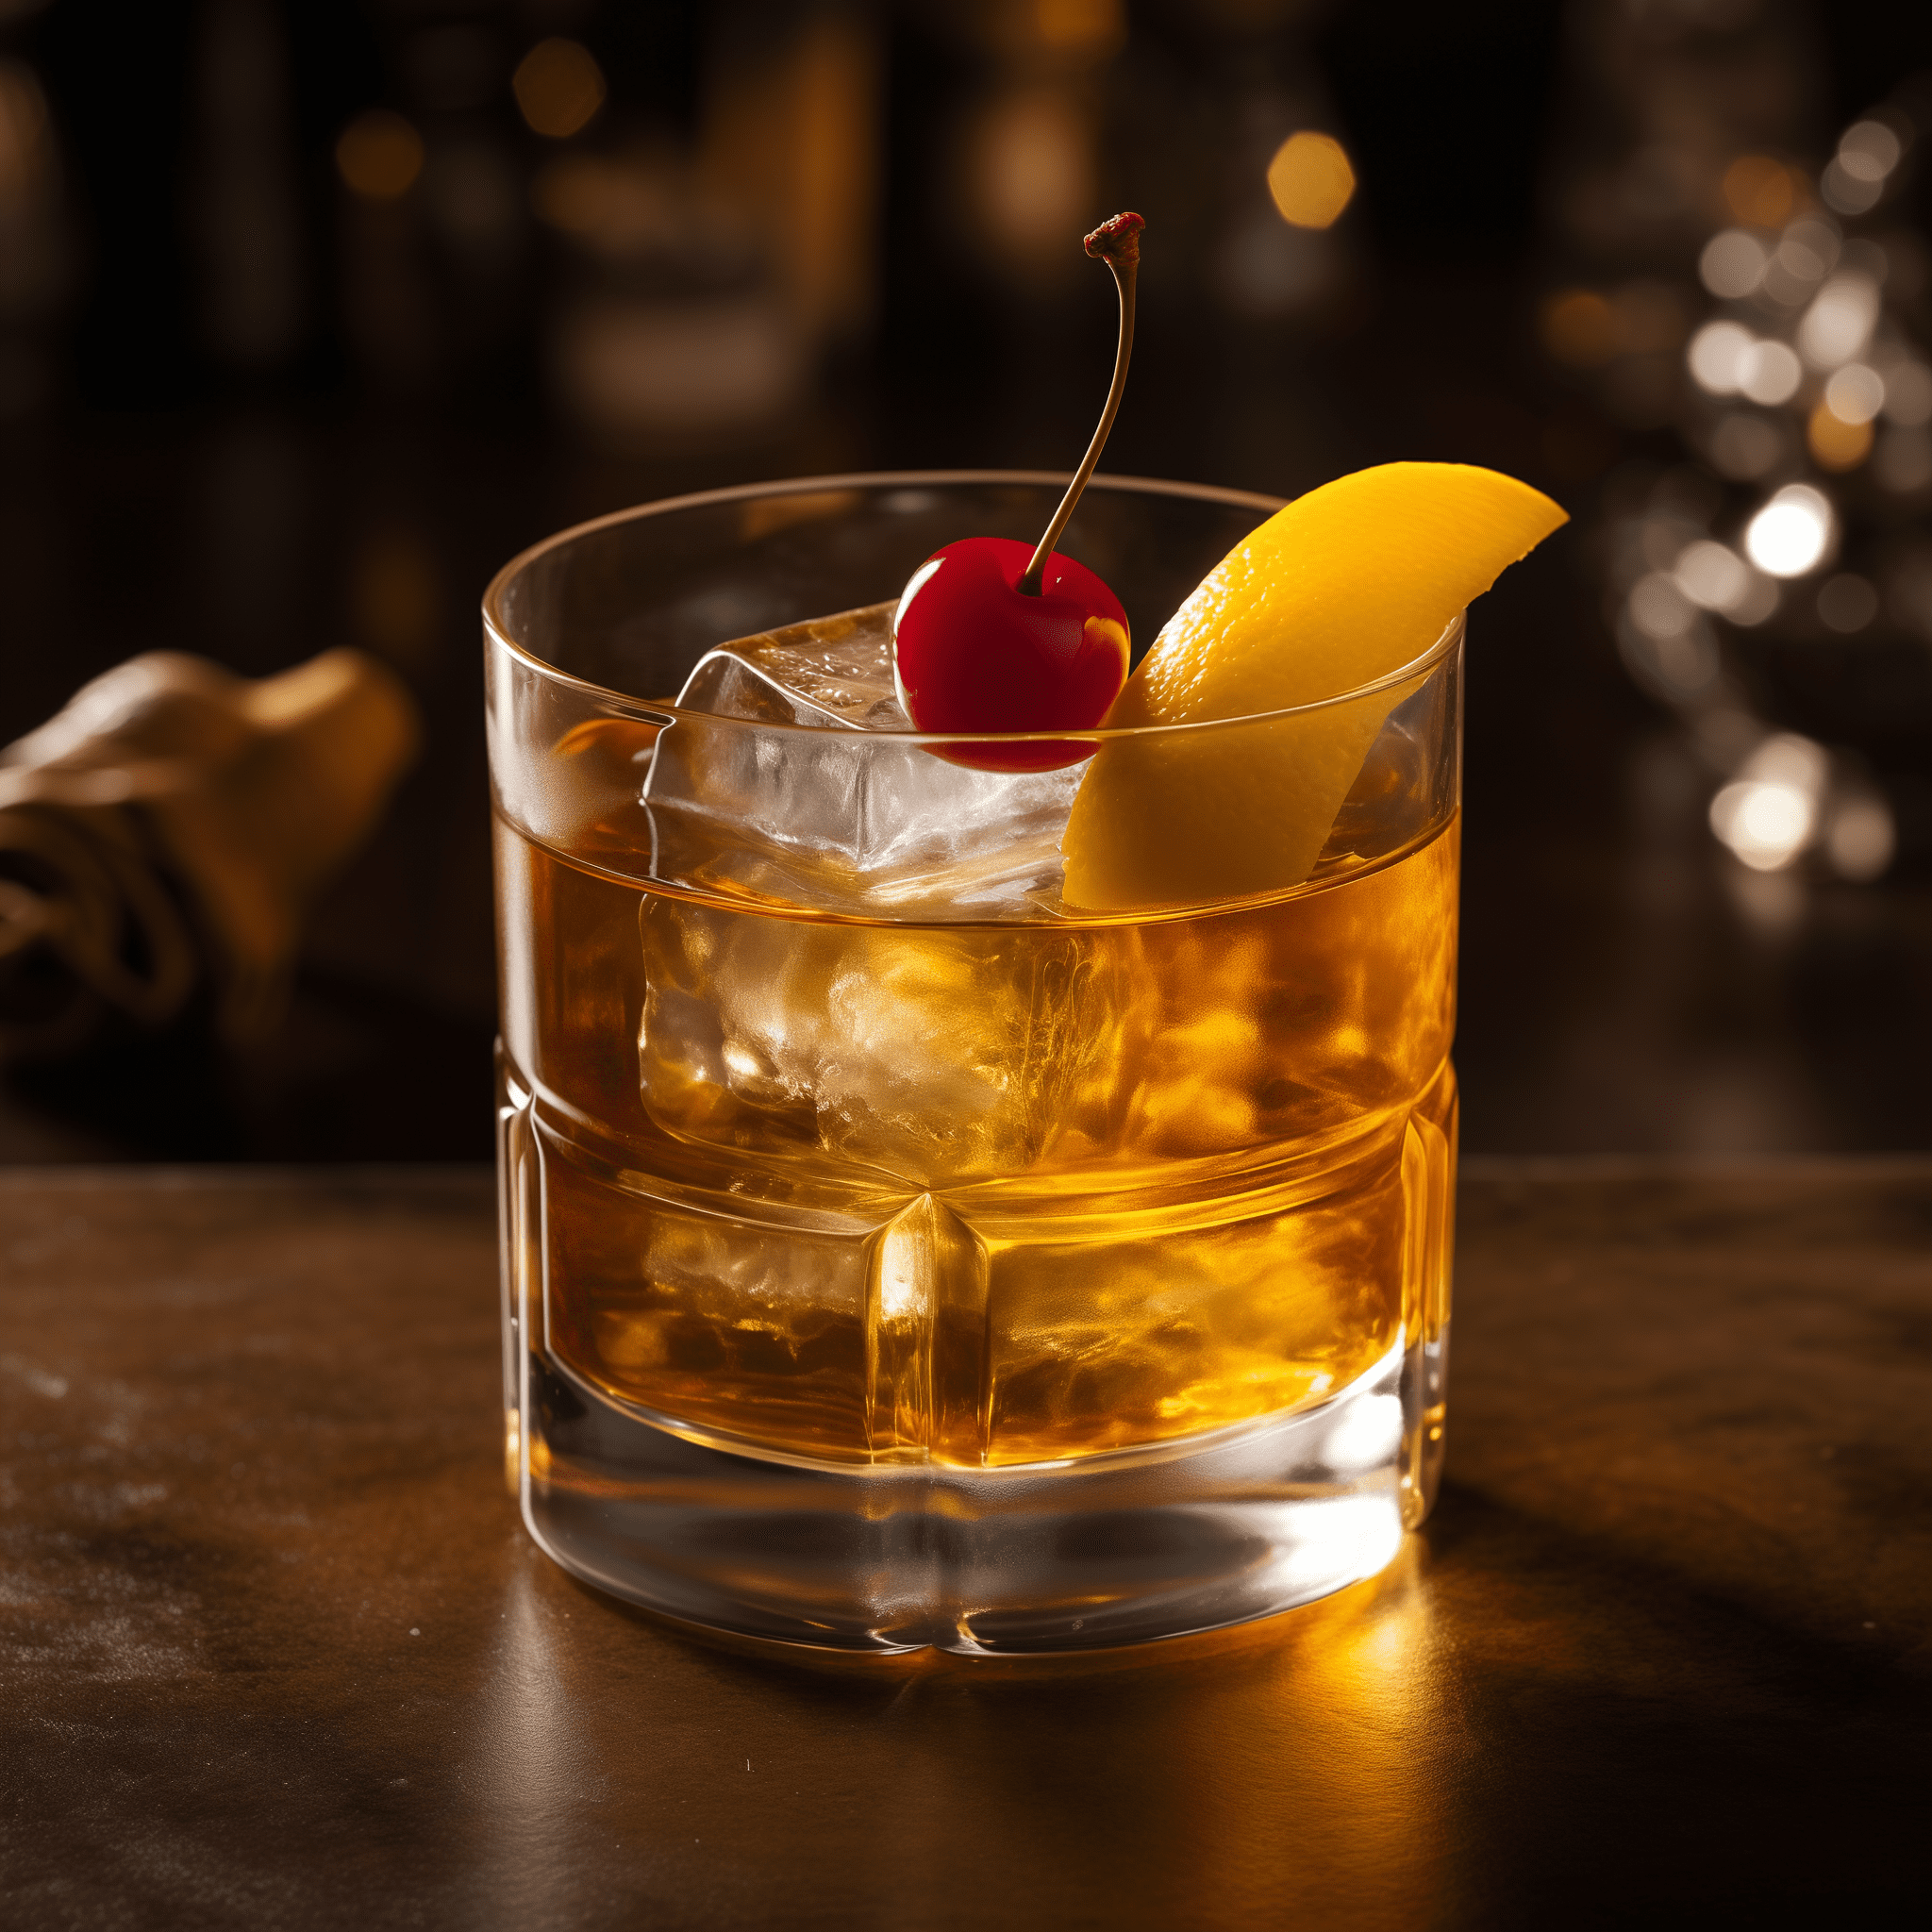 Manhattan Iced Tea Cocktail Recipe - The Manhattan Iced Tea offers a robust, rich flavor with a balance of sweetness and bitterness. The whiskey's warmth is perfectly complemented by the herbal notes of the vermouth, while the bitters add depth. It's a full-bodied cocktail with a lingering finish.